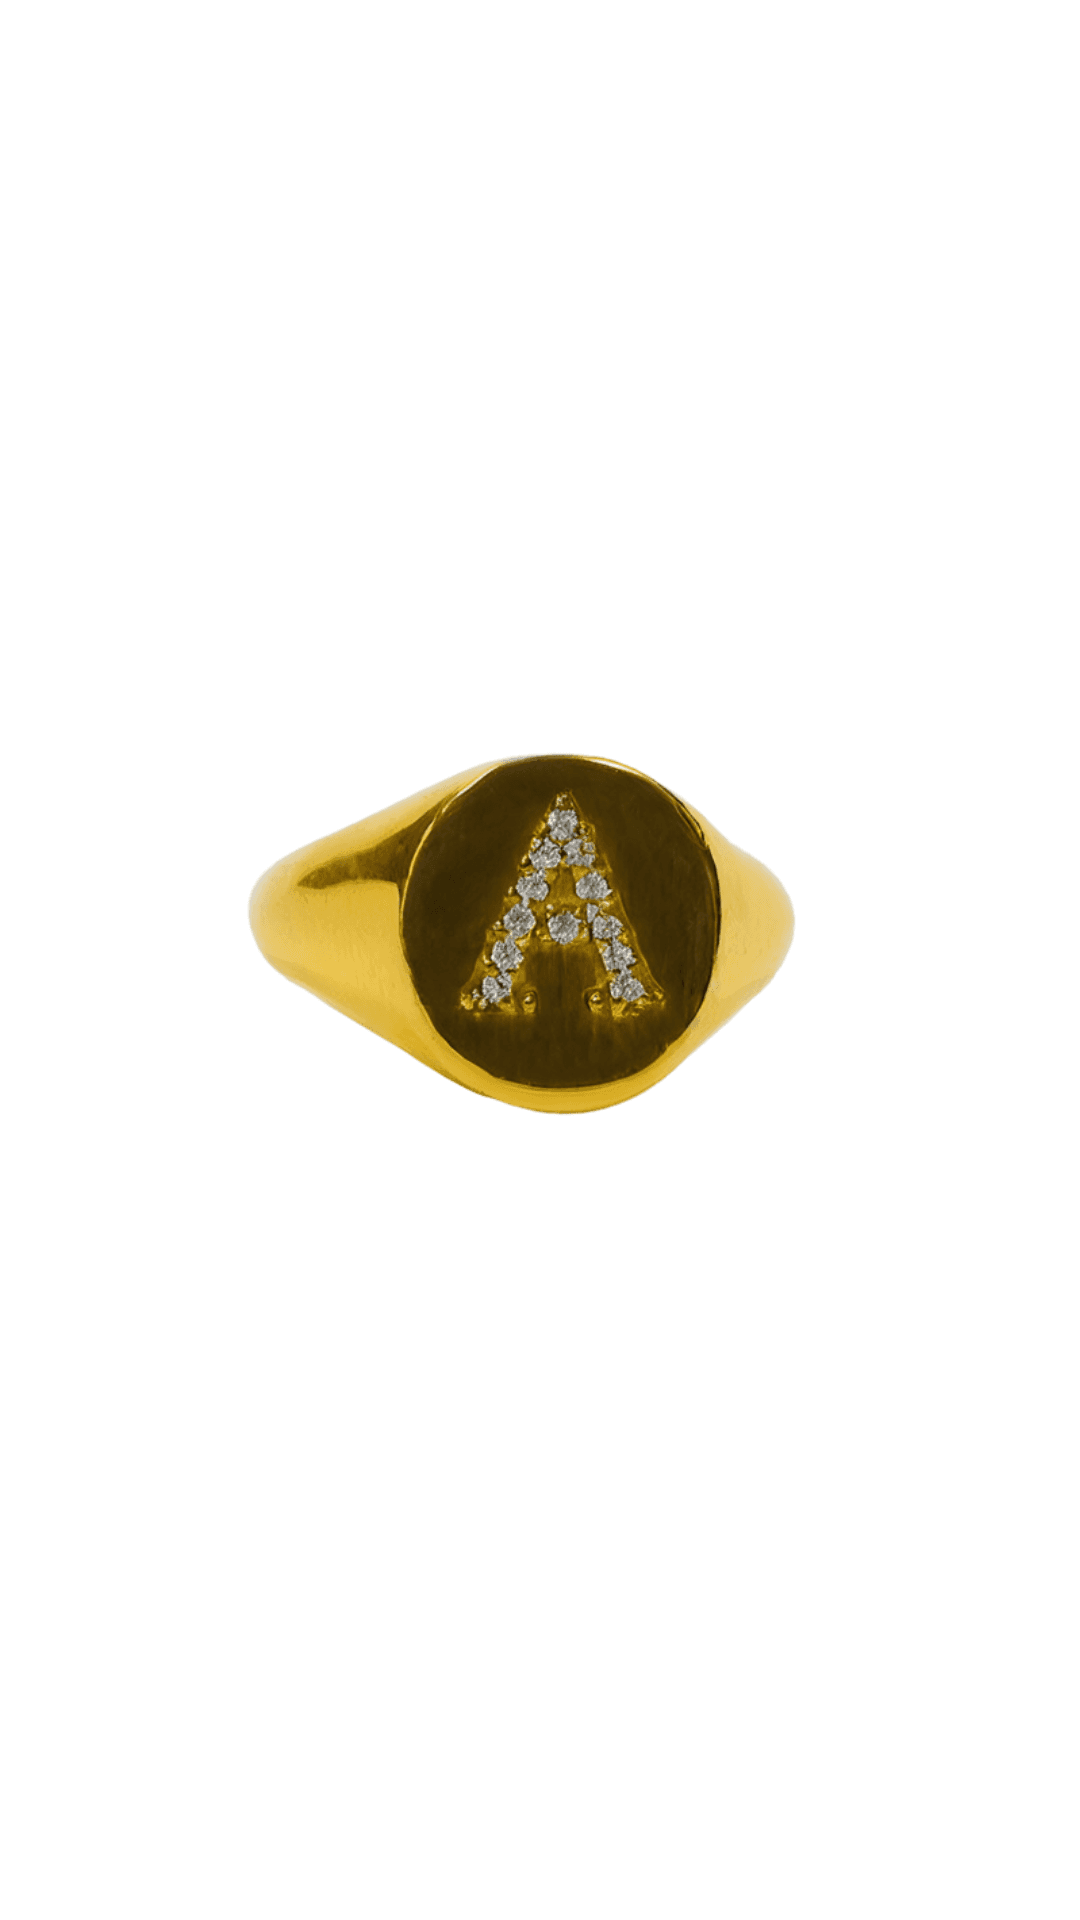 Oval signet ring with initial - Annoushe